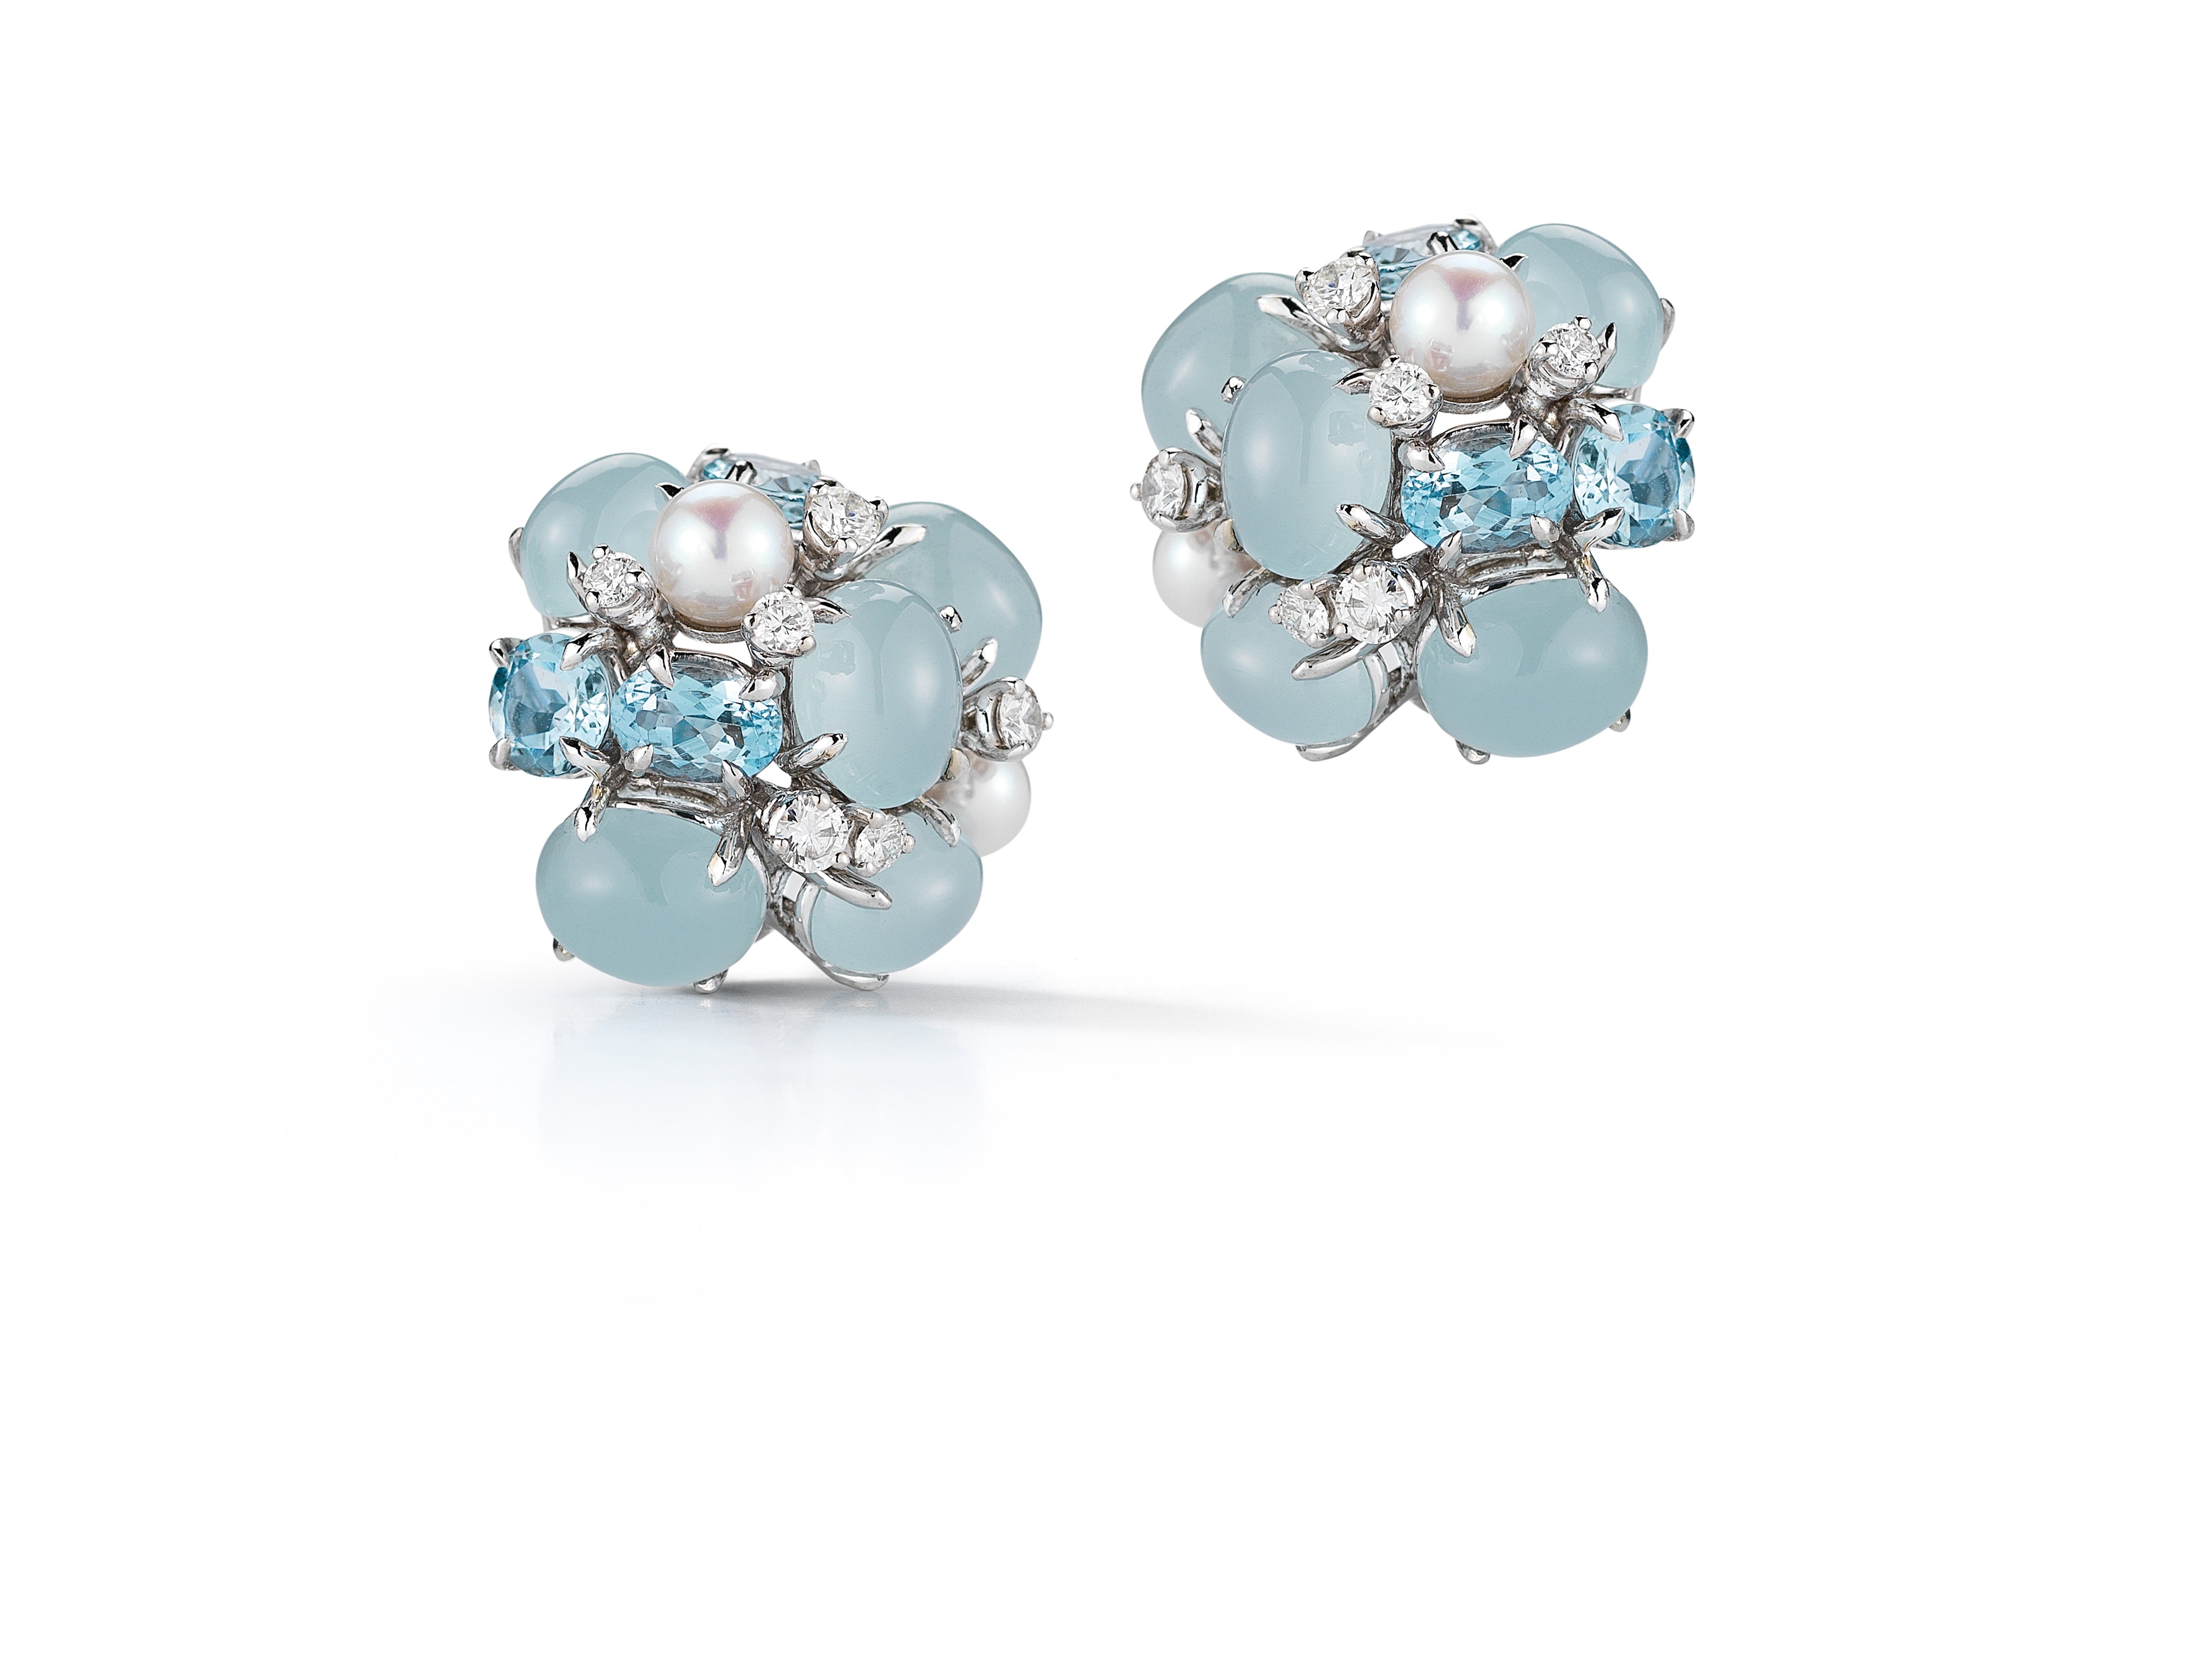 A pair of Bubble Earrings with Aquamarine, Pearl & Diamond set in 18K White Gold. Signed Seaman Schepps.